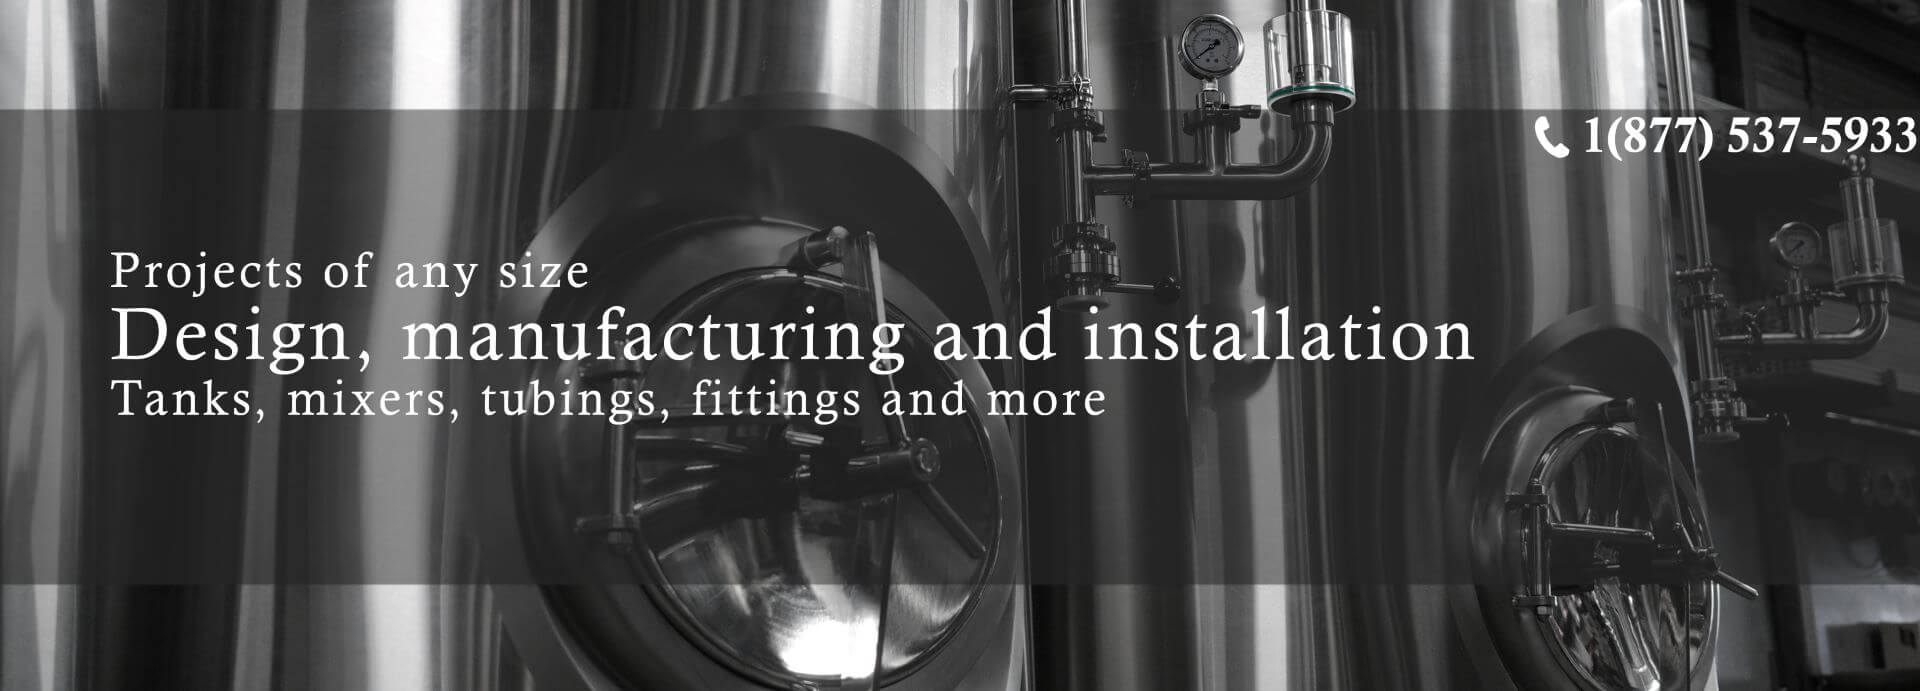 Design, Manufacturing, Modification and Maintenance of Stainless Steel